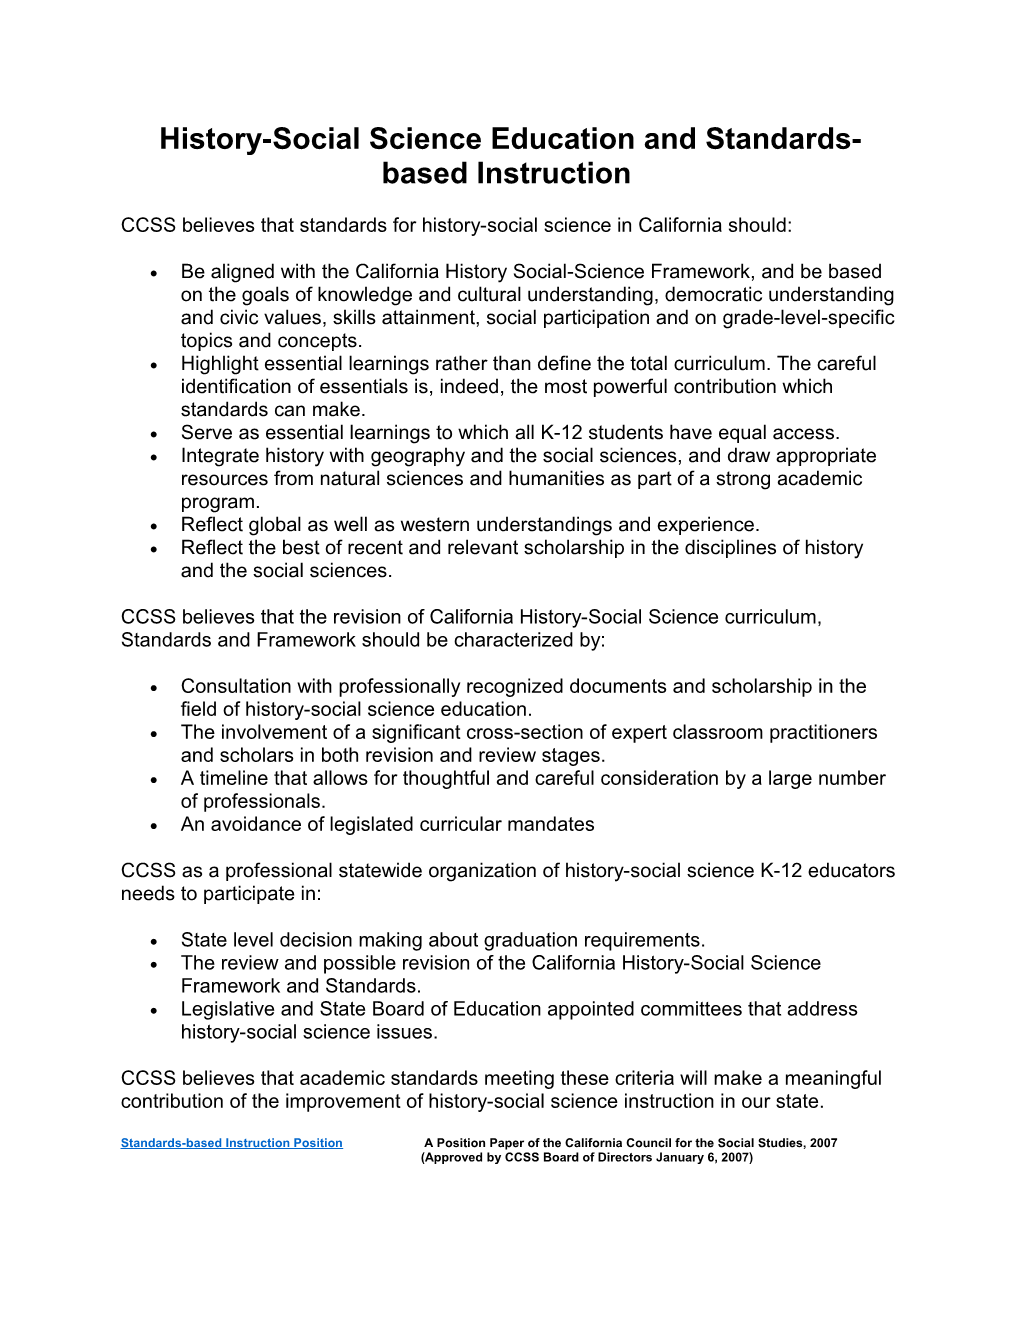 History-Social Science Education and Standards-Based Instruction